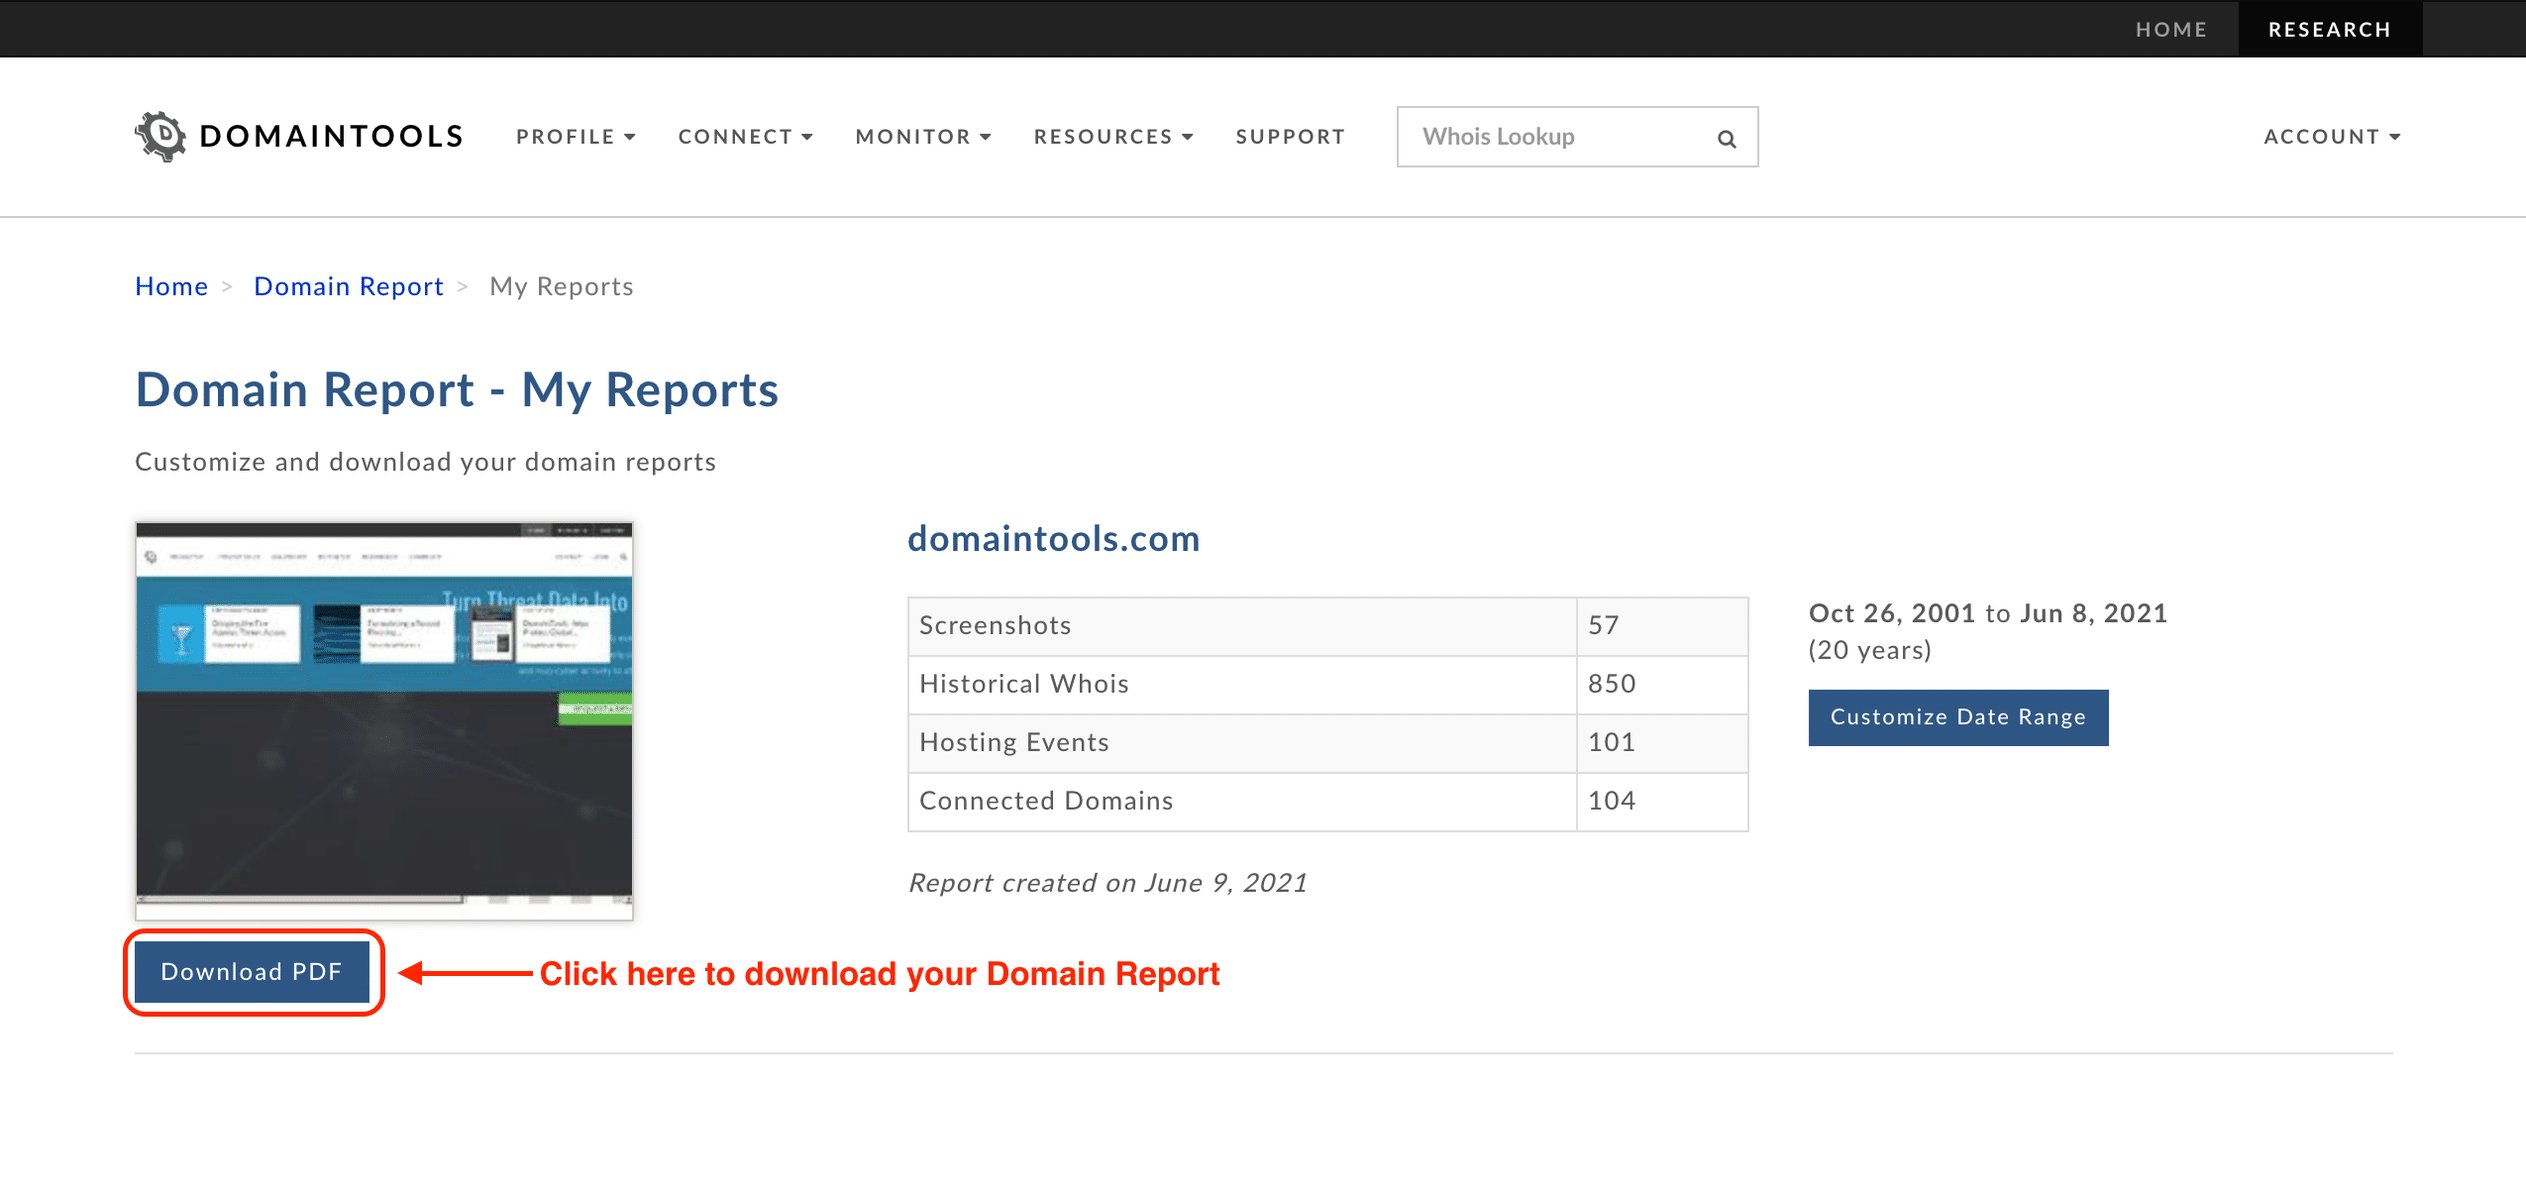 Click the button to download your Domain Report.